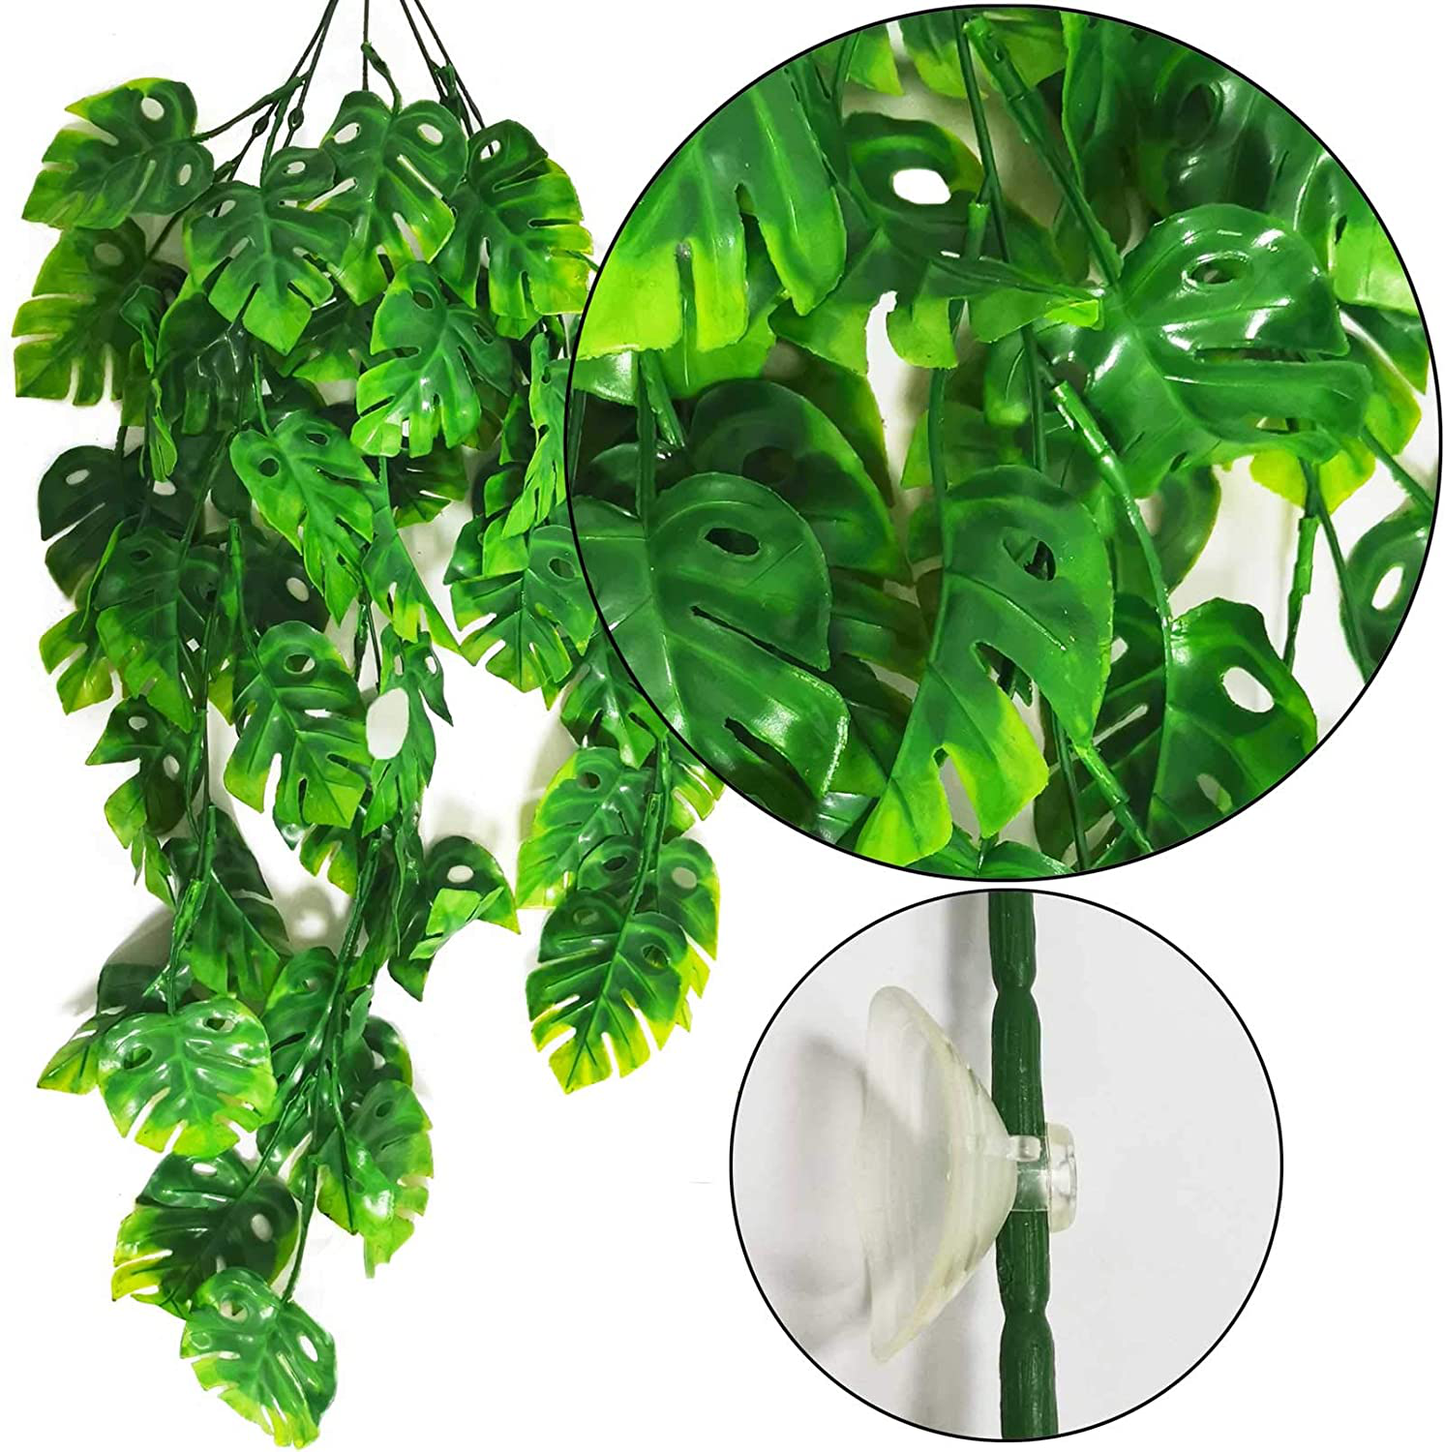 PINVNBY Reptile Plants Hanging Terrarium Plastic Fake Vines Lizards Climbing Decor Tank Habitat Decorations with Suction Cup for Bearded Dragons Geckos Snake Hermit Crab 3PCS Animals & Pet Supplies > Pet Supplies > Reptile & Amphibian Supplies > Reptile & Amphibian Habitats PINVNBY   